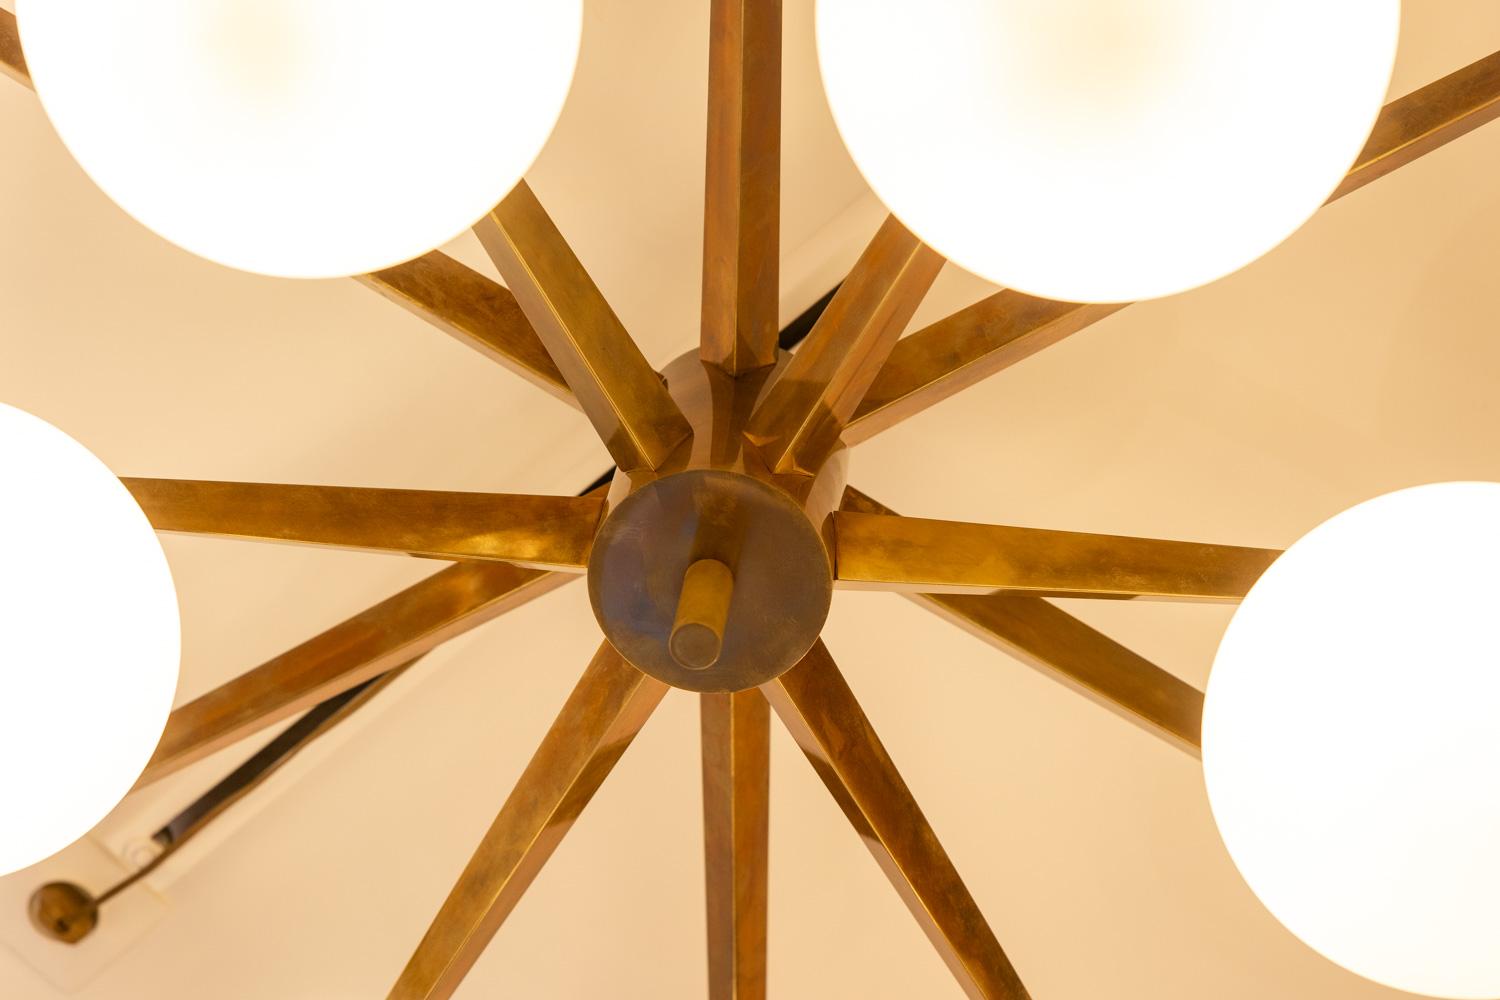 Angelo Lelli for Arredoluce, in the style of.

Chandelier. Frame in matt gilded brass with a decorative circular part in its center, with 12 finely beveled arms of light with their round-shaped white opalines.

Contemporary Italian work in small